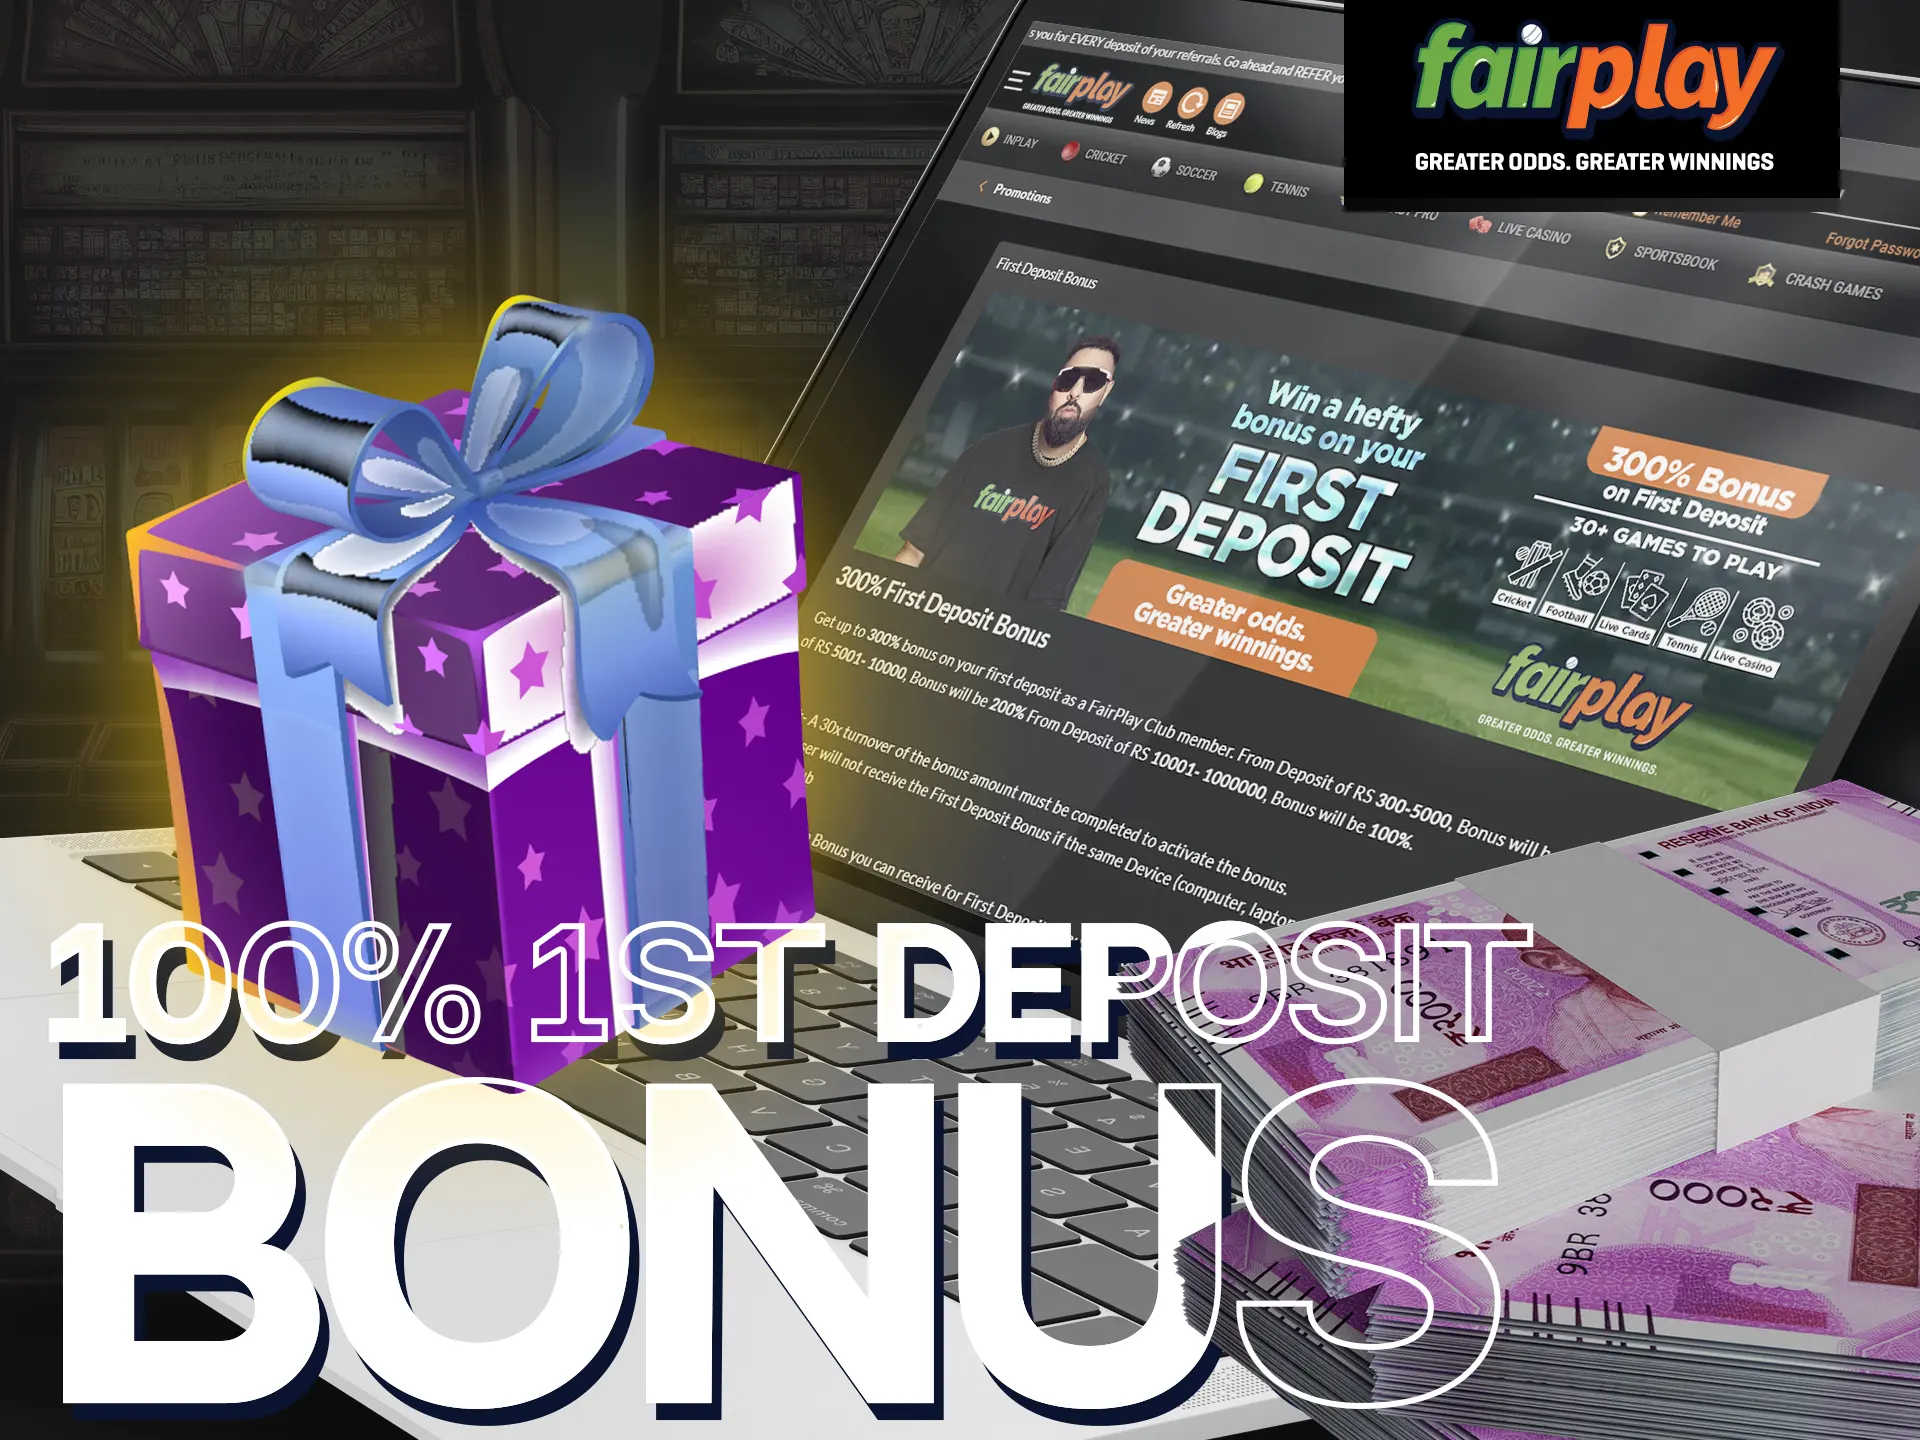 Get the 100% deposit bonus from Fairlay just at the beginning to have an amazing start.